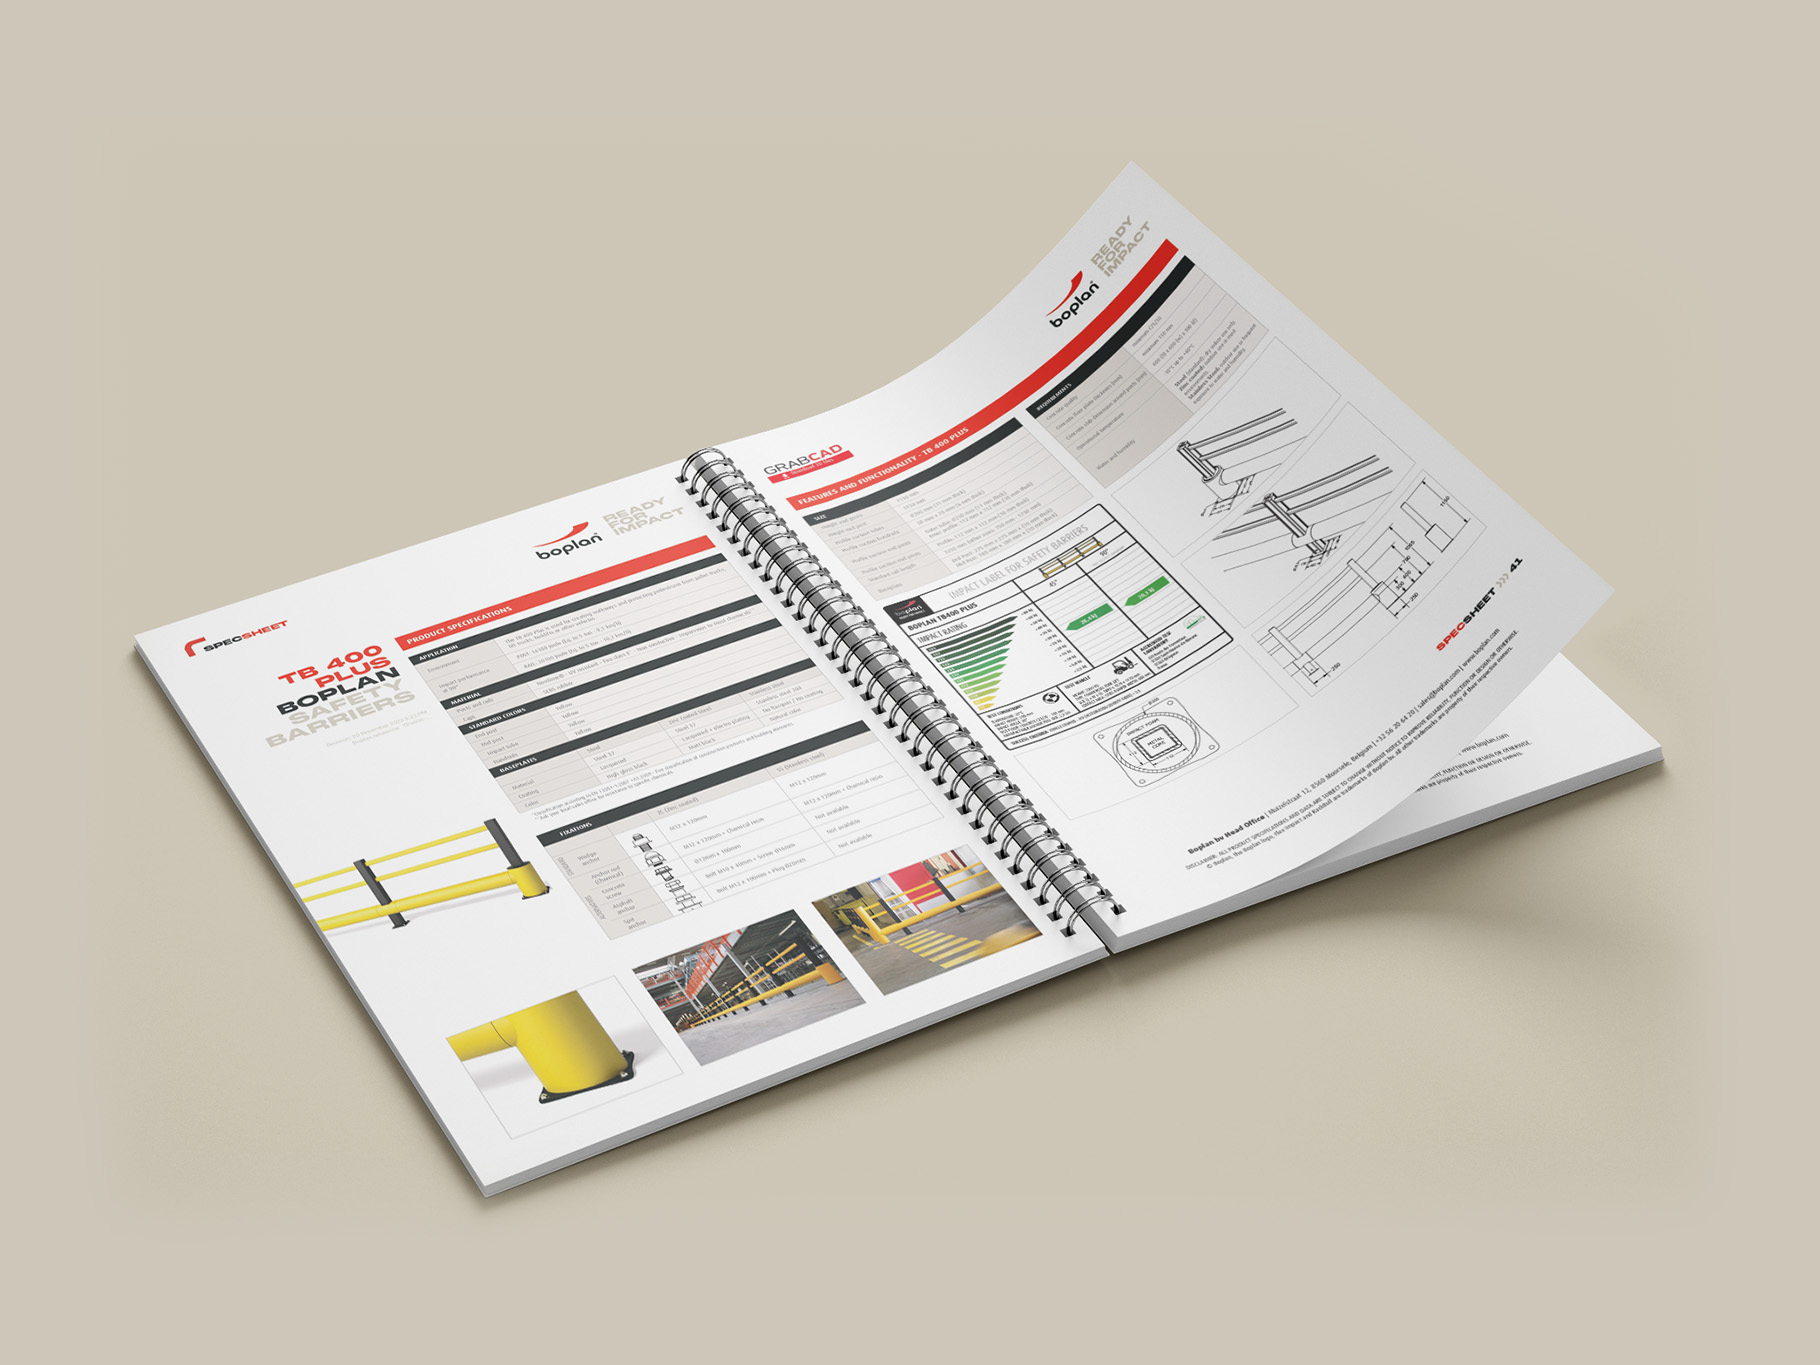 Illustration of the Boplan Spec Book with detailed product sheets and specifications